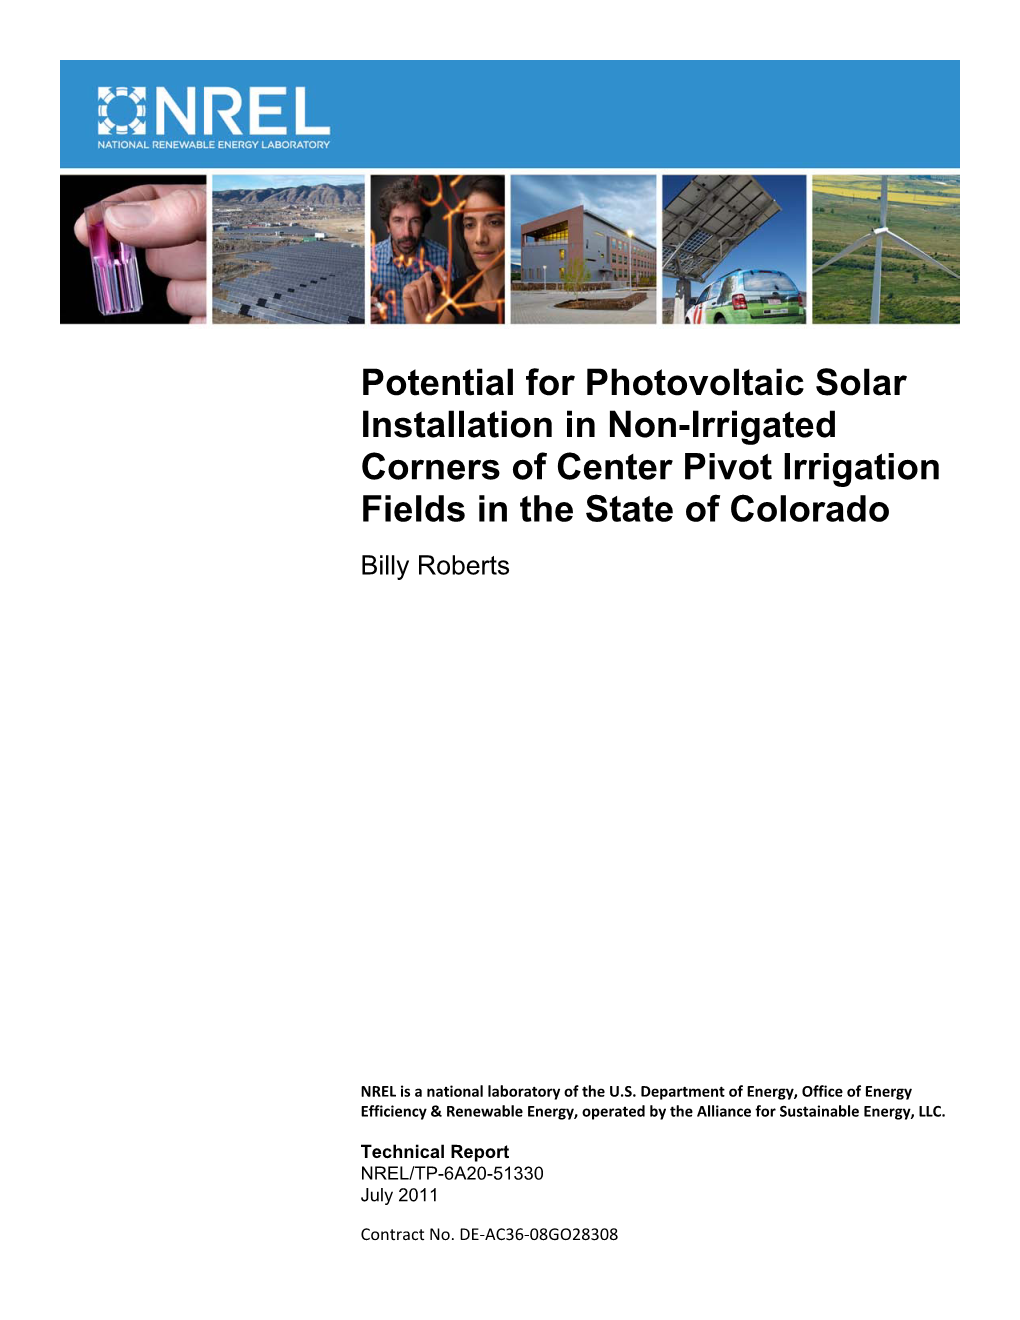 Potential for Photovoltaic Solar Installation in Non-Irrigated Corners of Center Pivot Irrigation Fields in the State of Colorado